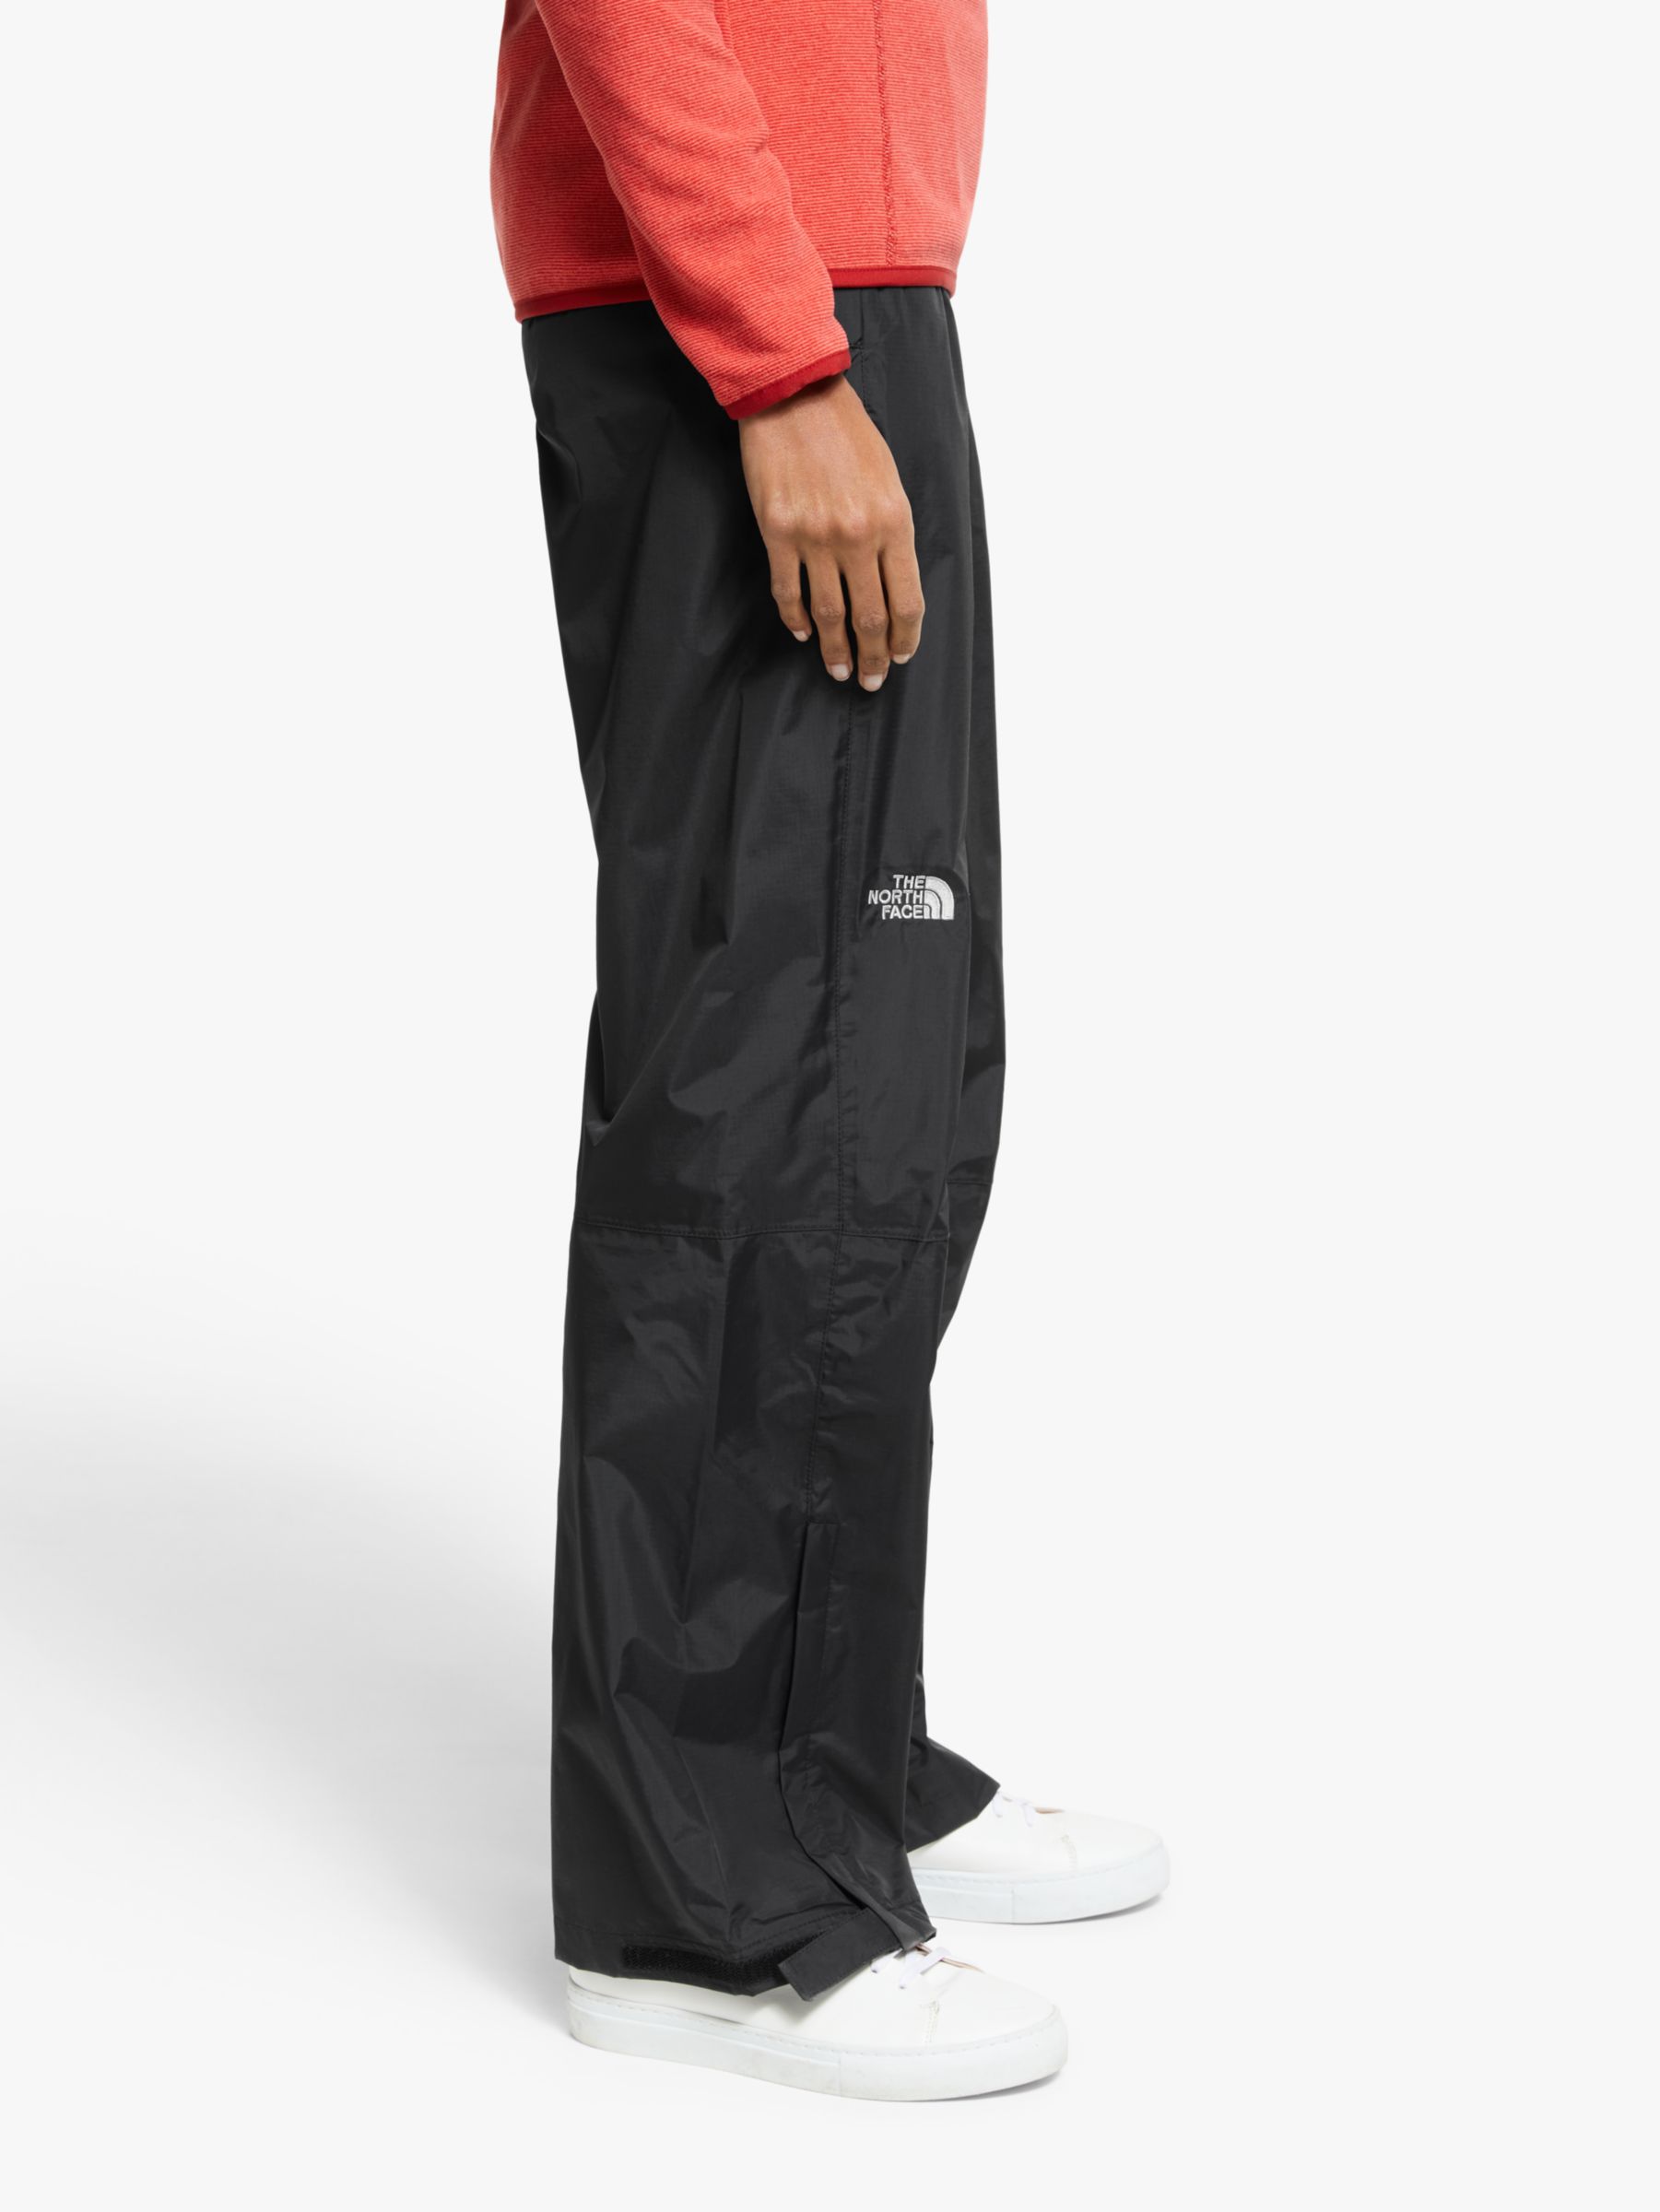 north face resolve trousers